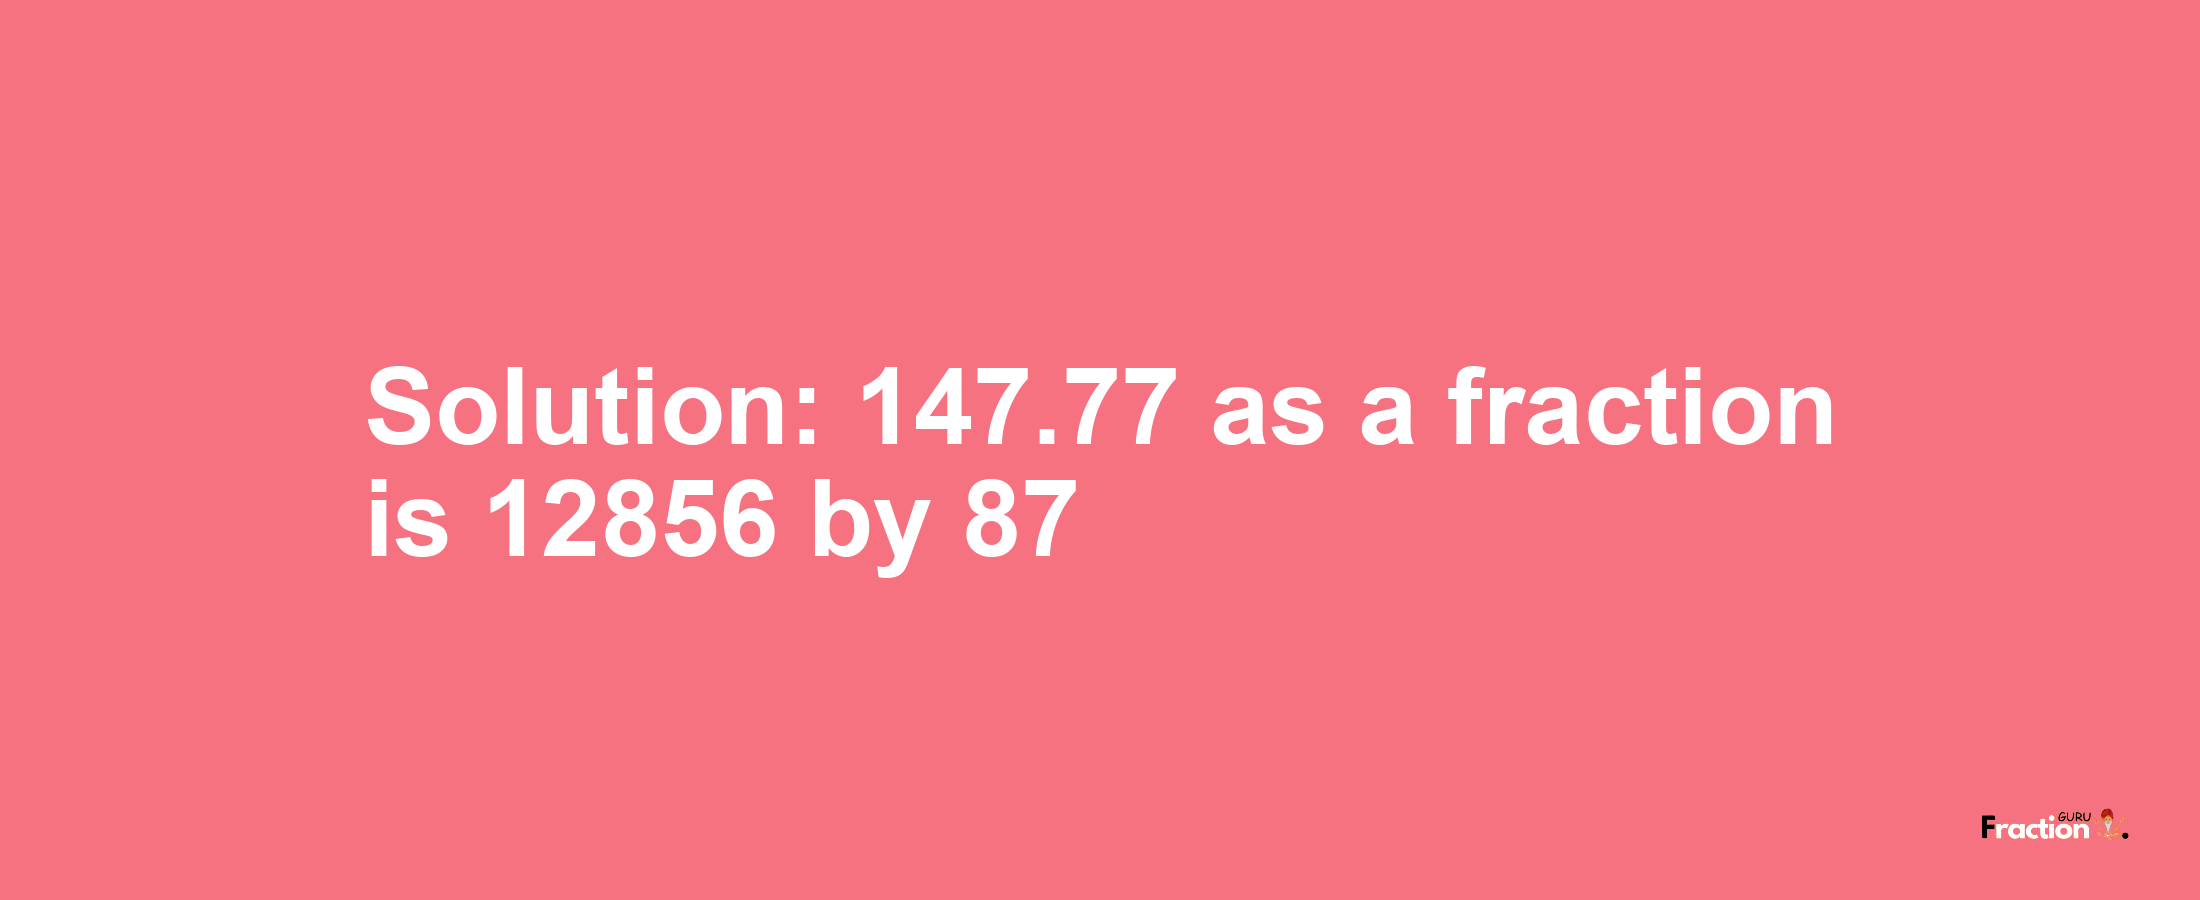 Solution:147.77 as a fraction is 12856/87